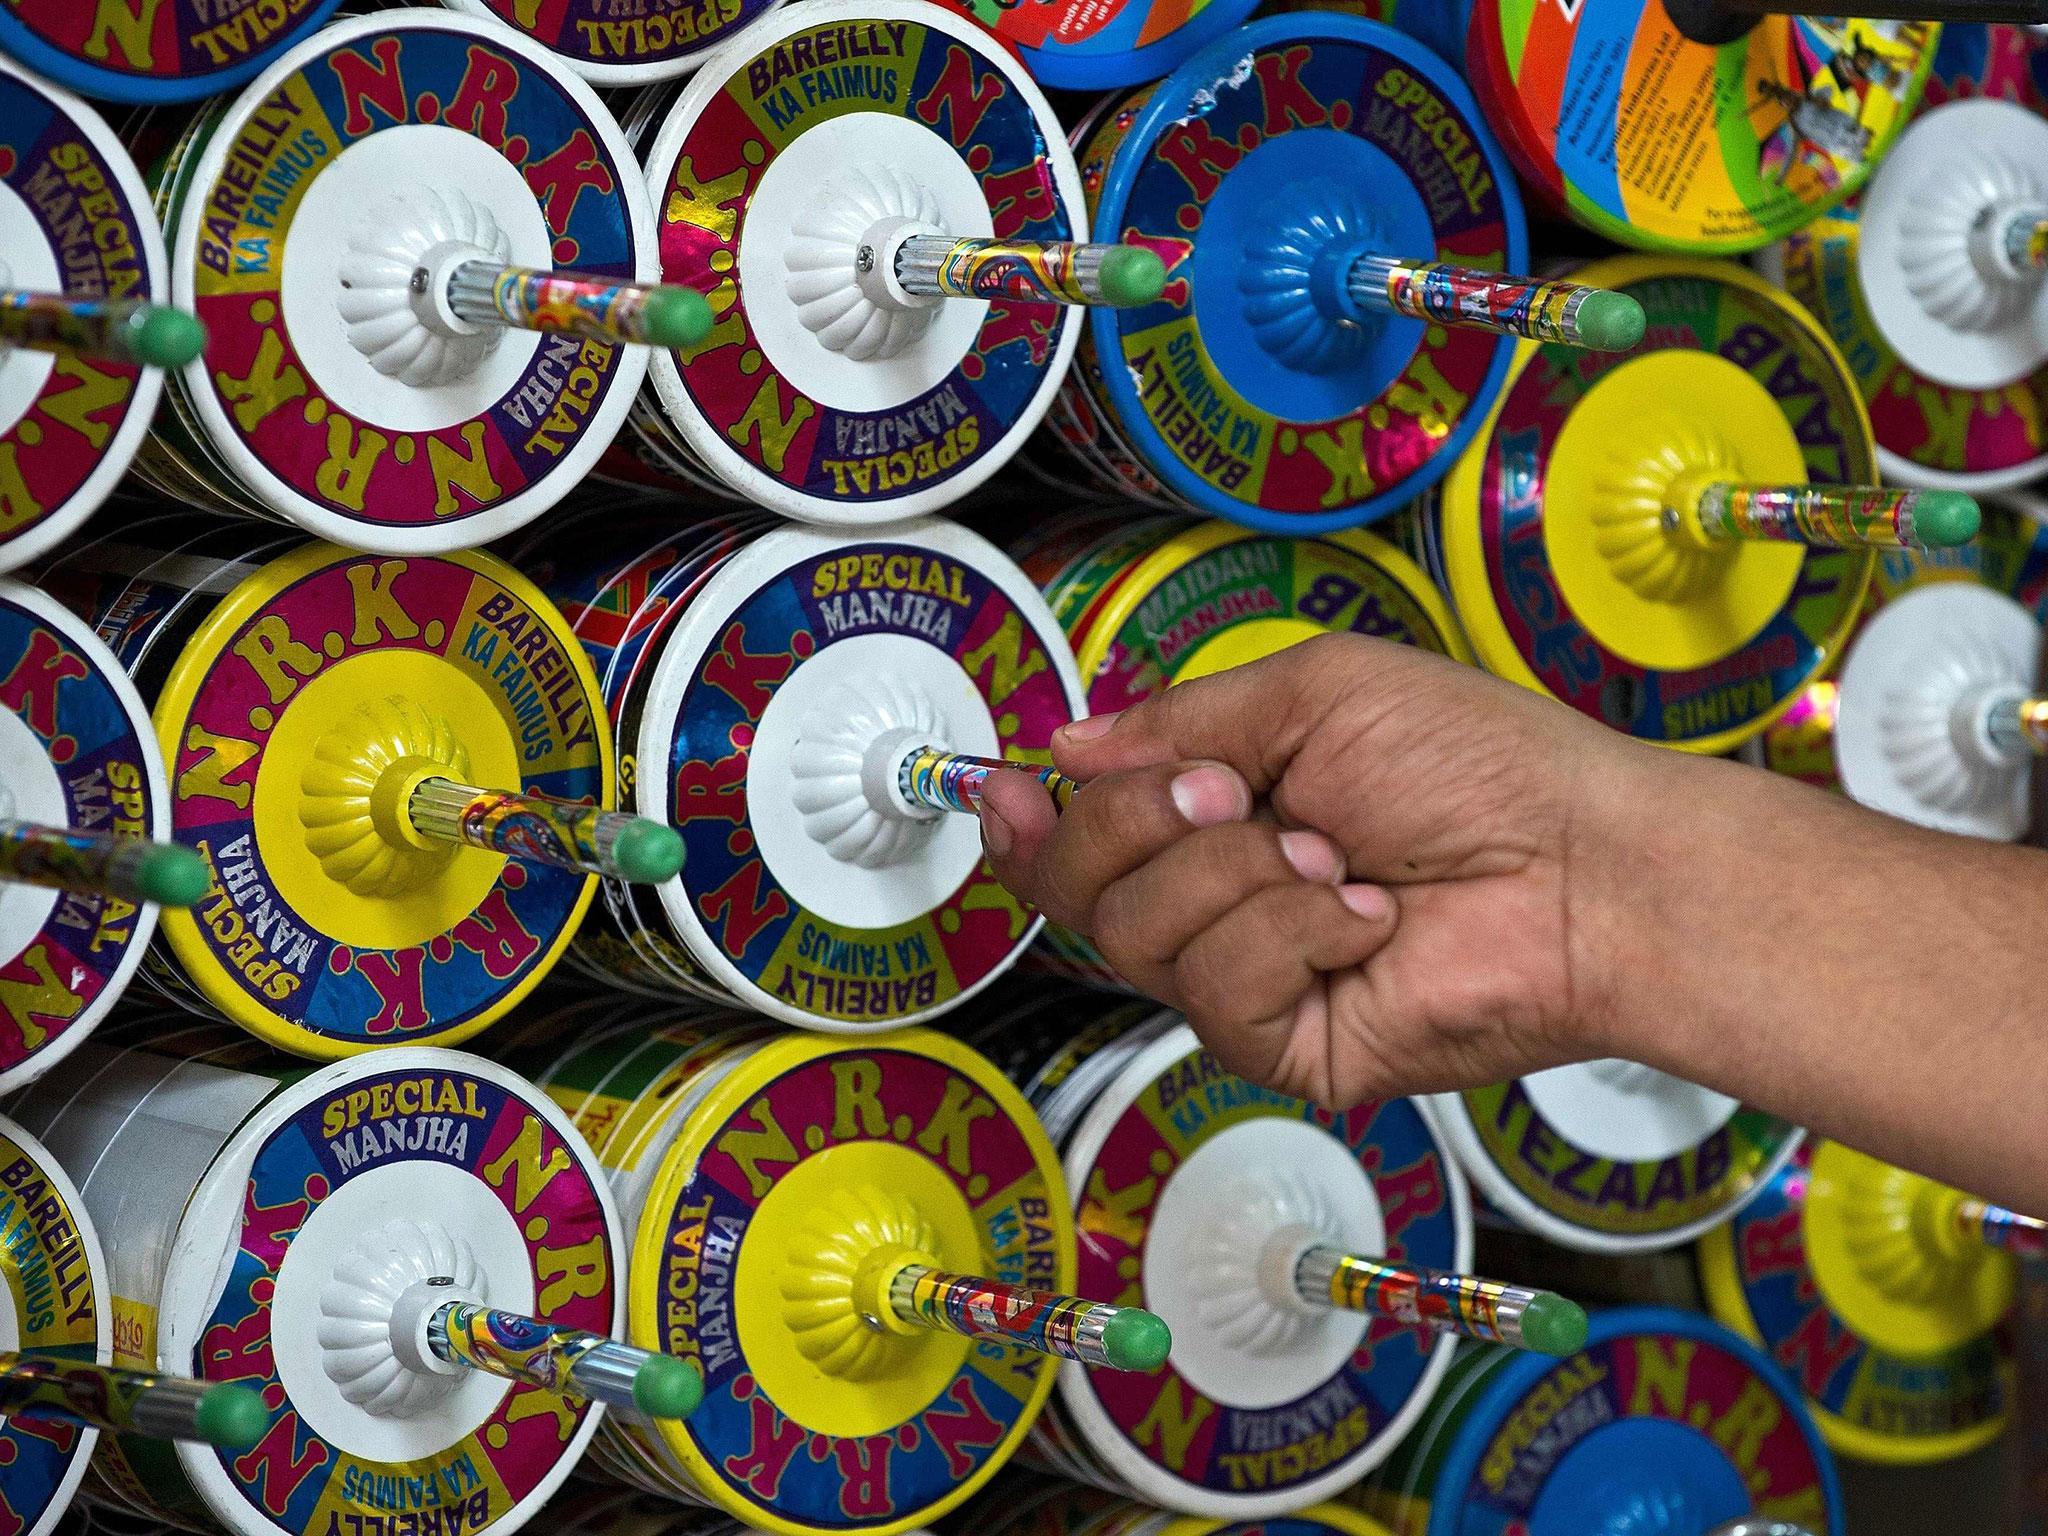 An Indian kite-maker removes a reel of kite string to be used at his shop ahead of Independence Day celebrations in New Delhi